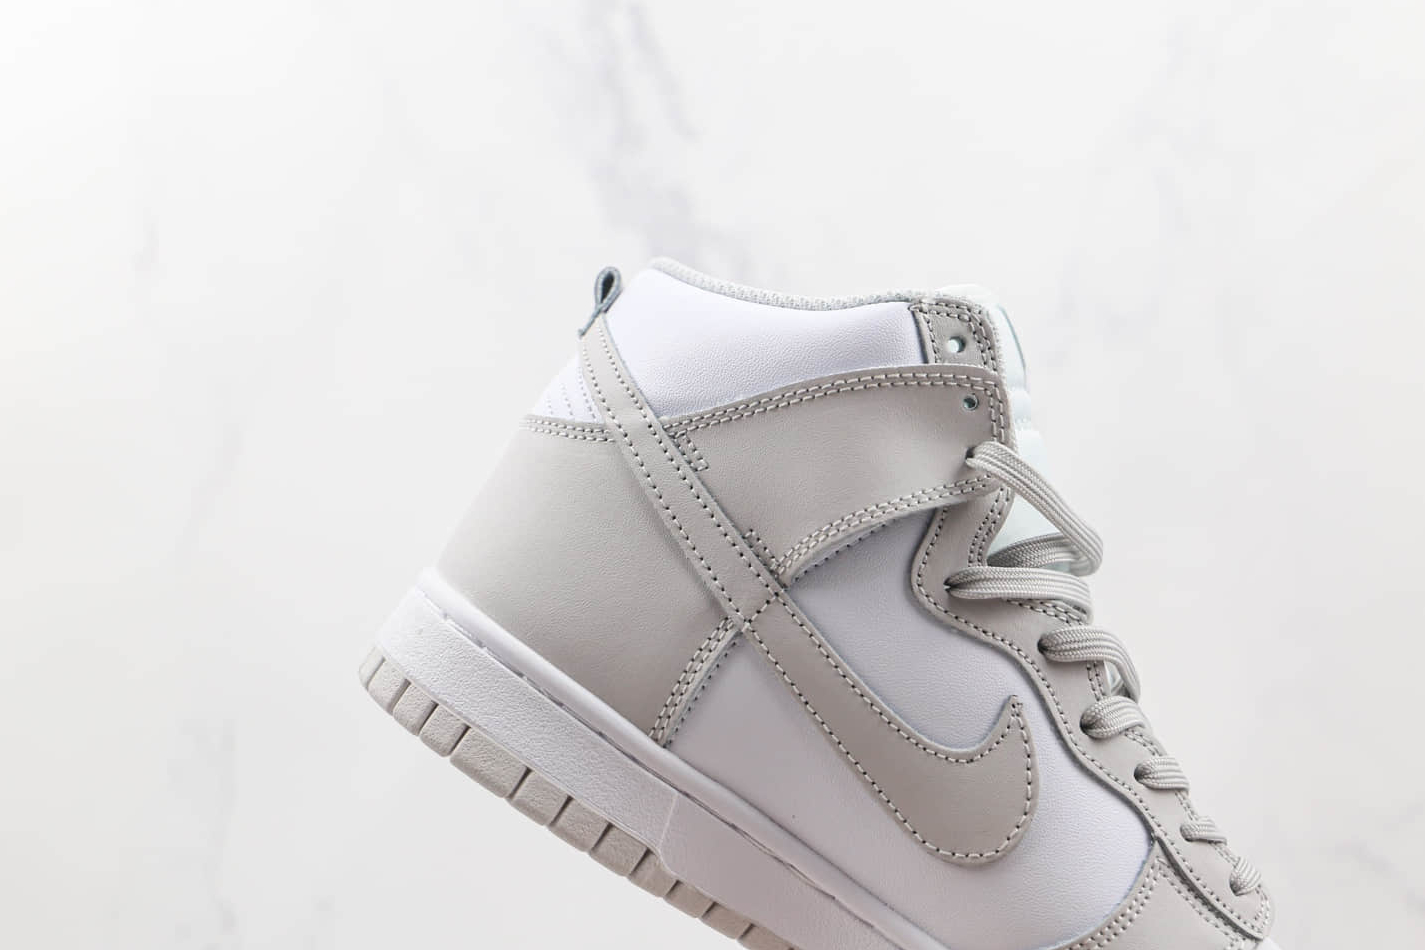 Nike Dunk High 'Vast Grey' DD1399-100: Classic Style meets Contemporary Design